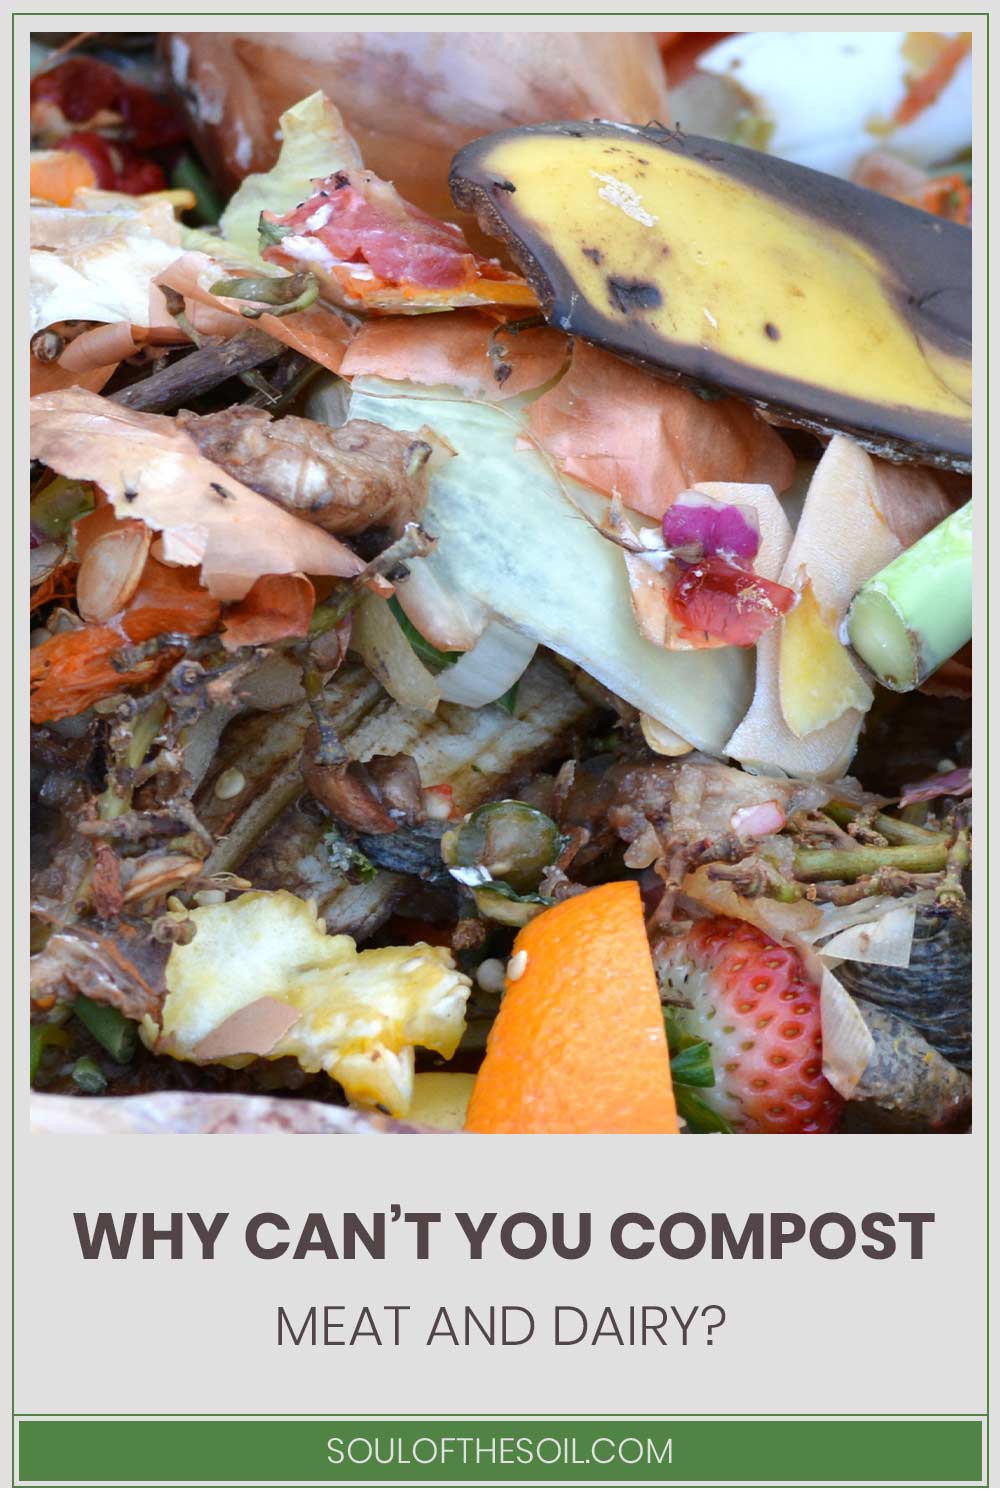 Some rotten fruits - Why Can’t You Compost Meat And Dairy?